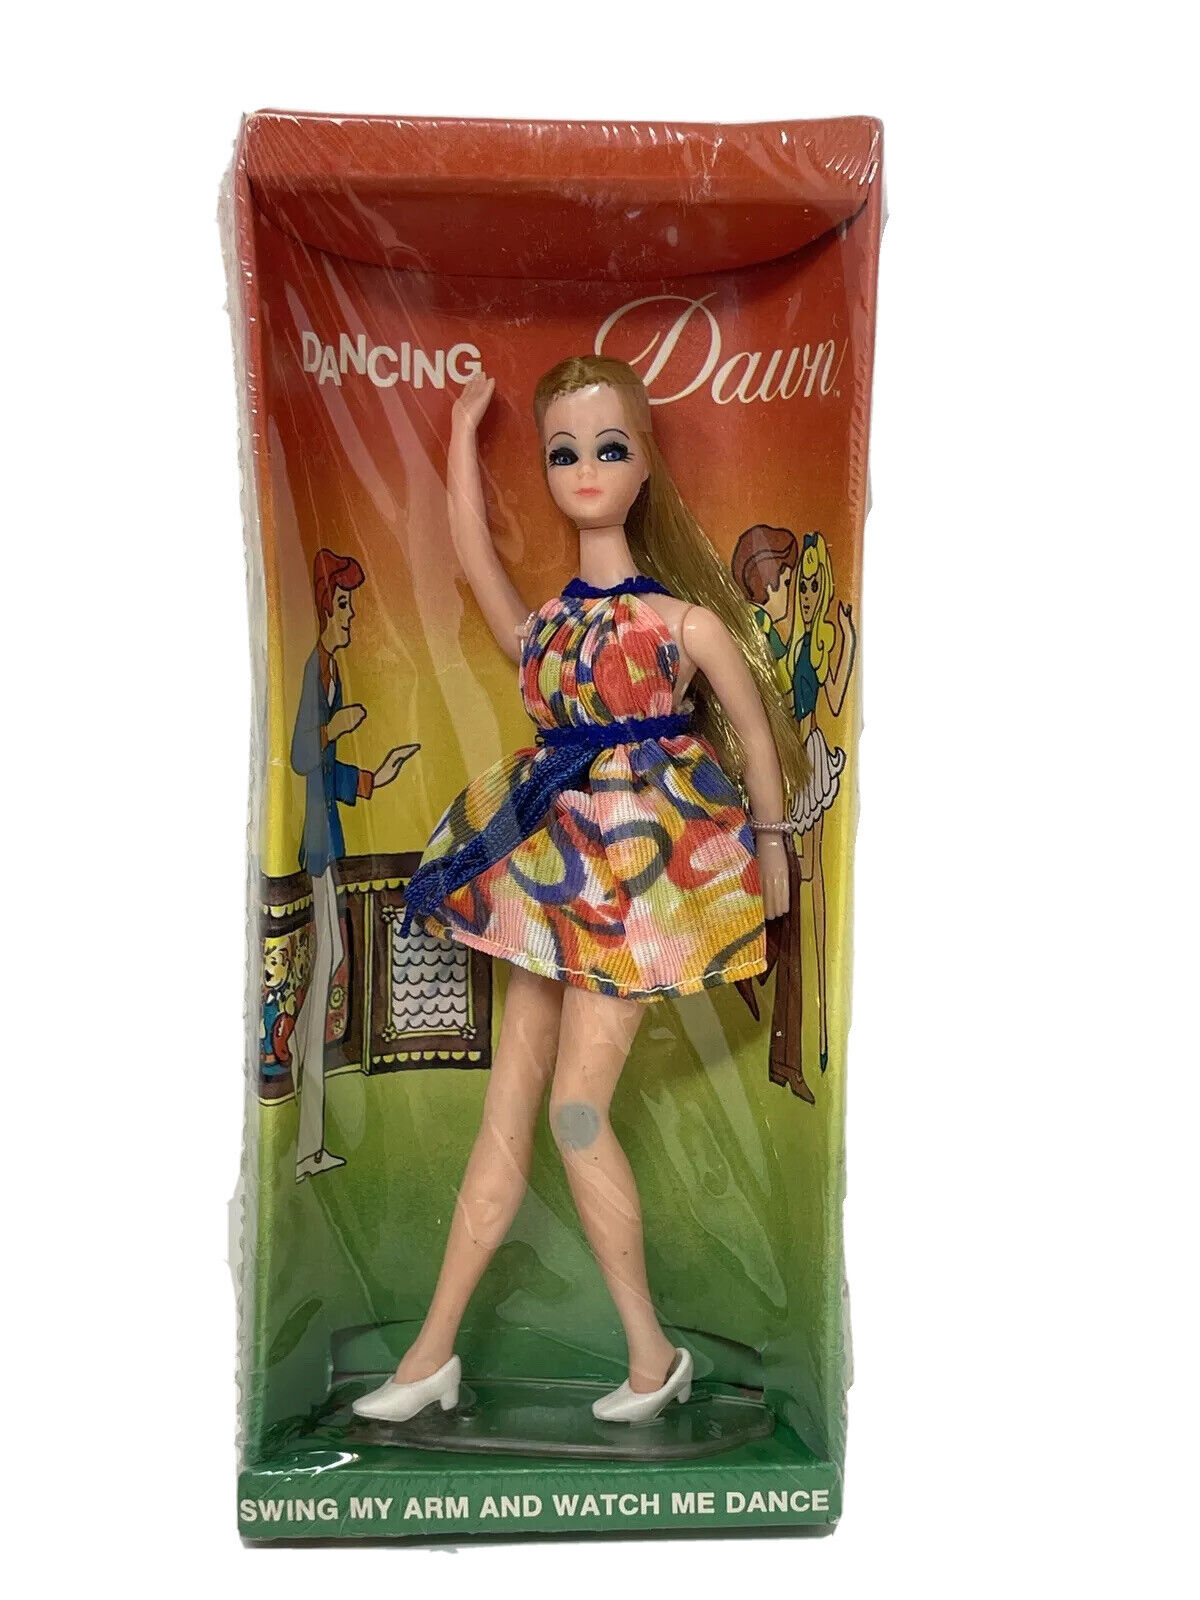 Rare Vintage Variation Dancing Dawn Doll New In Sealed Box